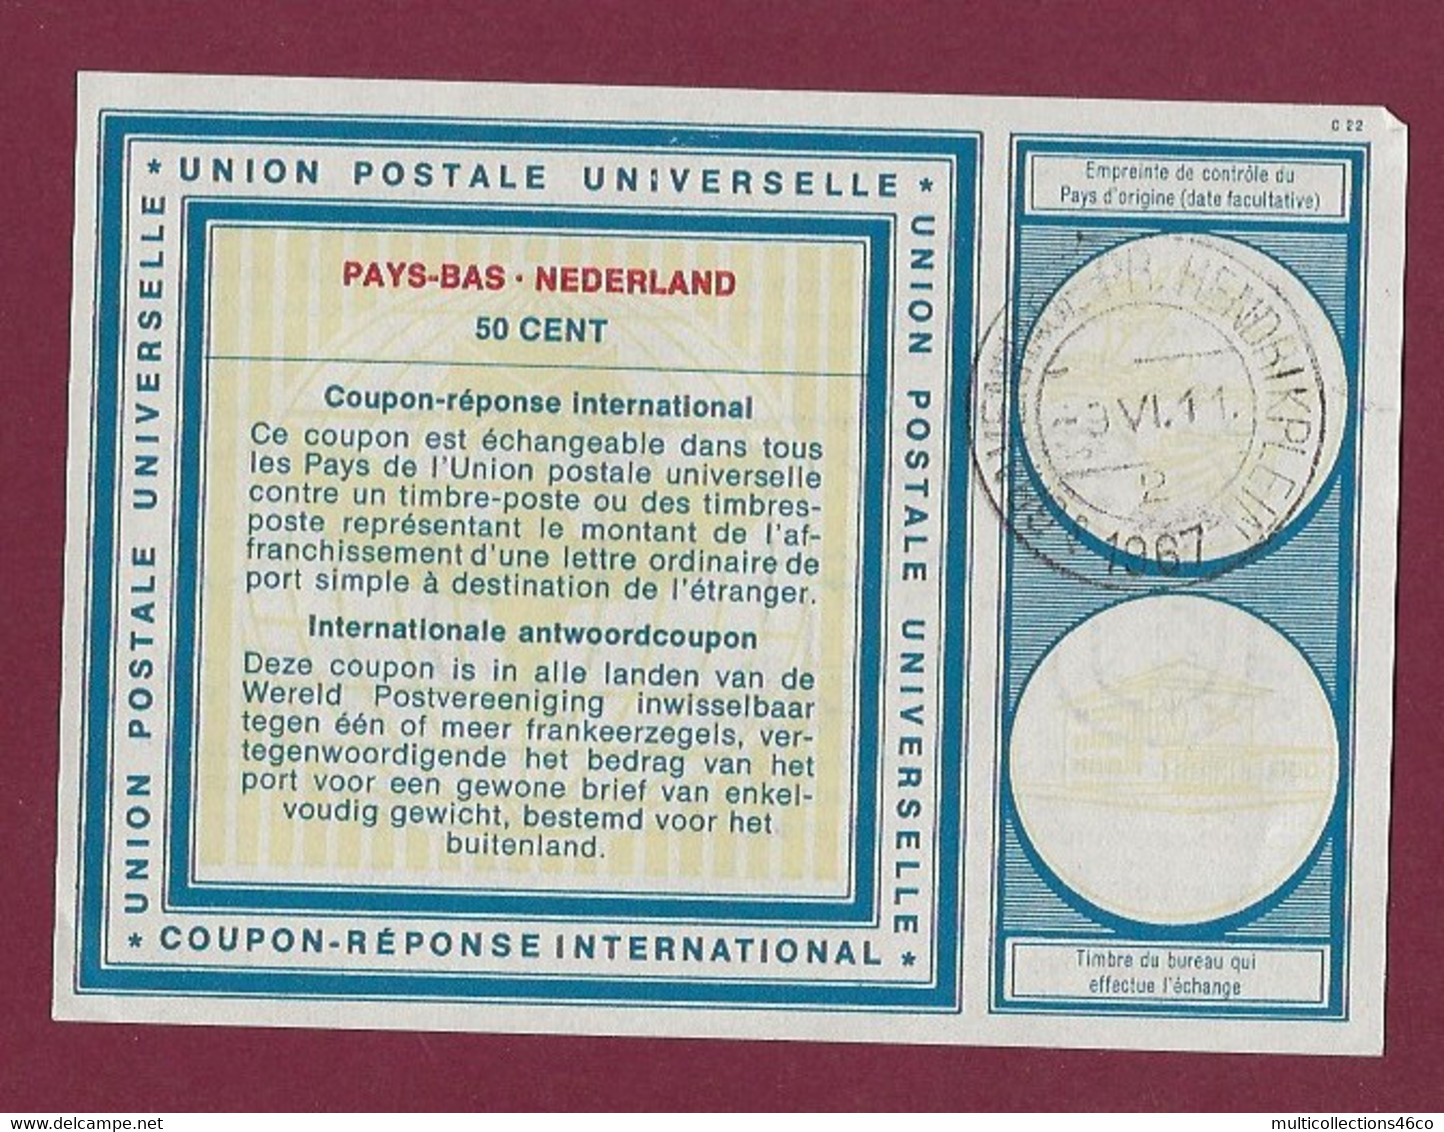 081120 -  COUPON REPONSE INTERNATIONAL  PAYS BAS 50 CENT - Gravenhage 1967 - Reply Coupons